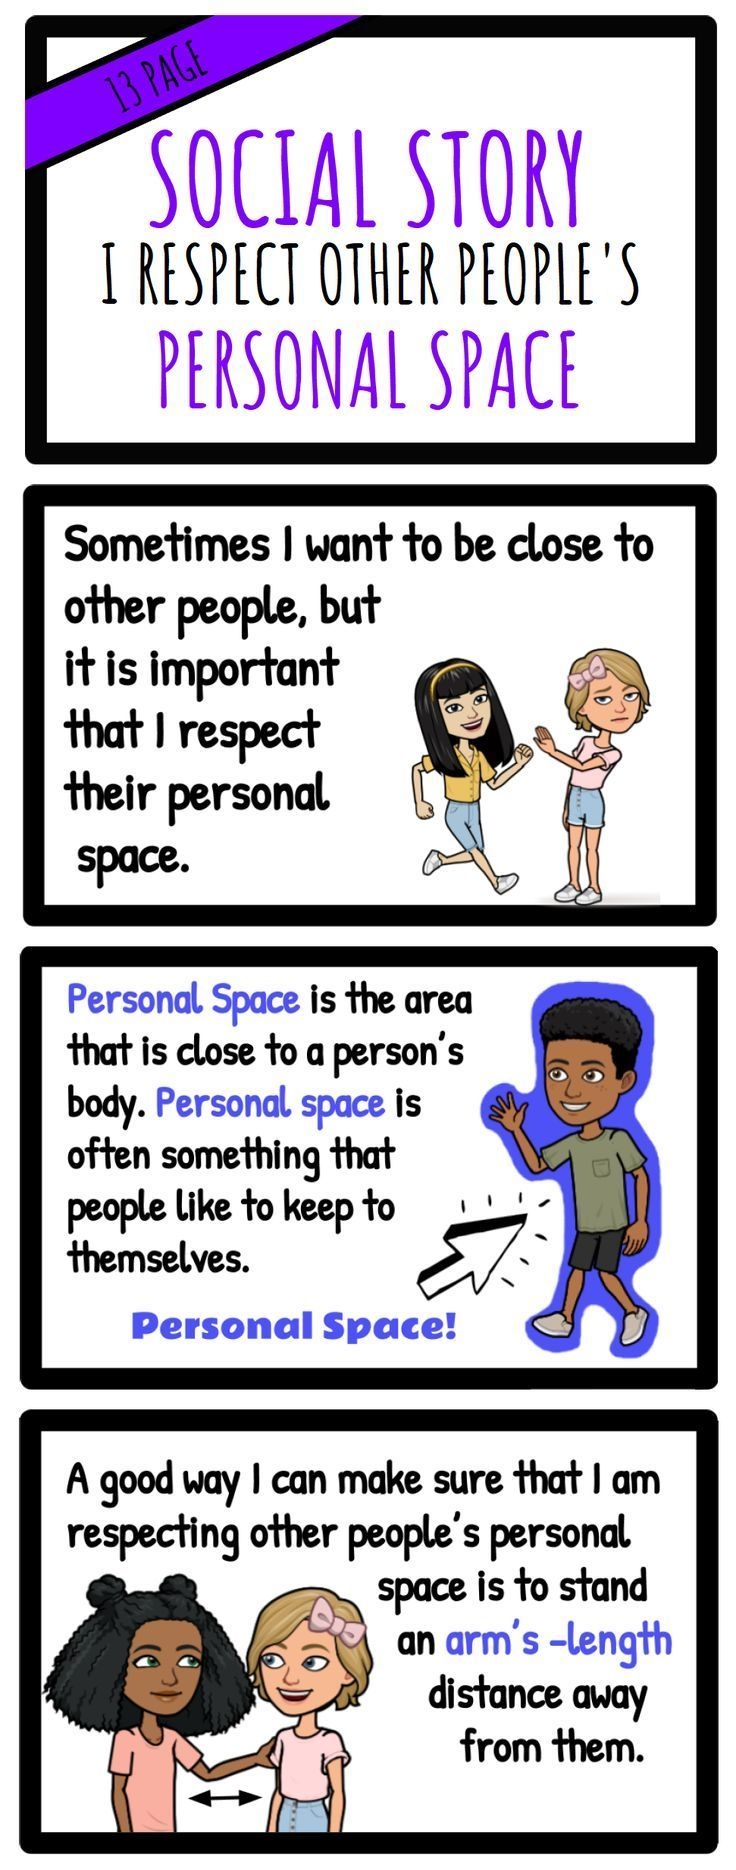 I Respect Other People s Personal Space Social StoryElementary Counseling Counseling Conflict Personal Space Social Story Social Skills Lessons Social Stories